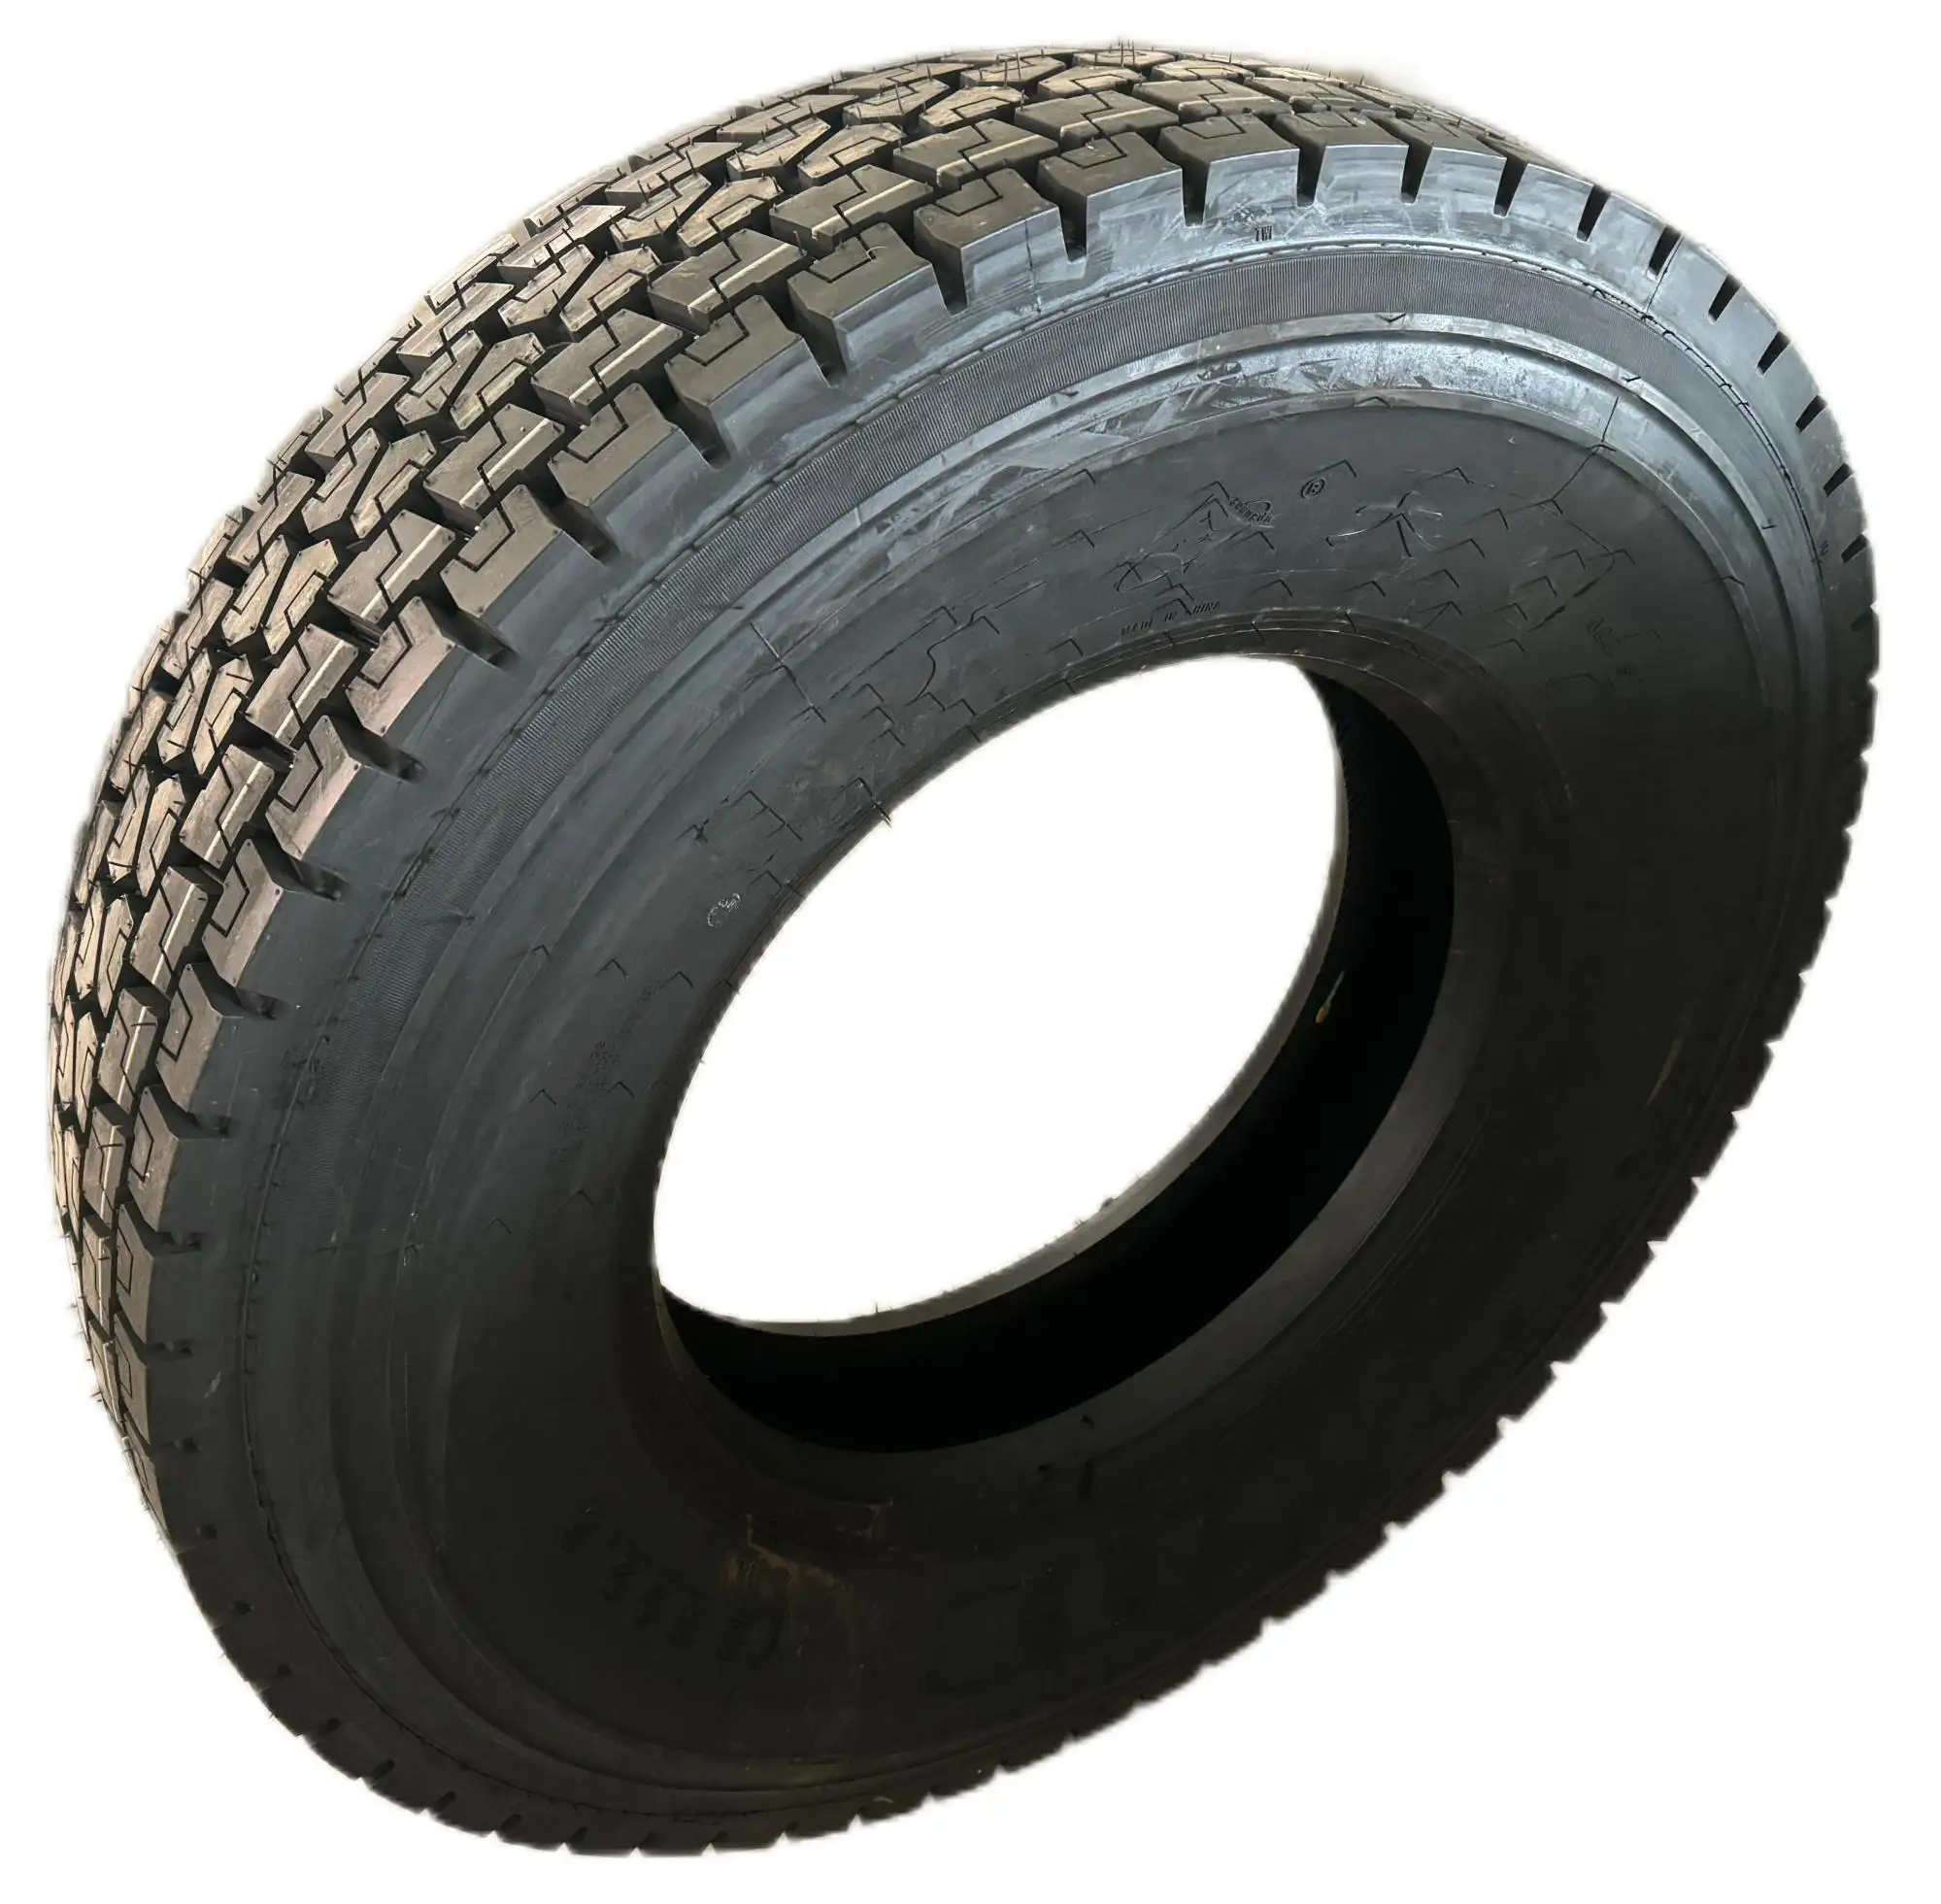 DOT Approved Annaite Amberstone TBR Tyres Wholesale truck tires 12R22.5